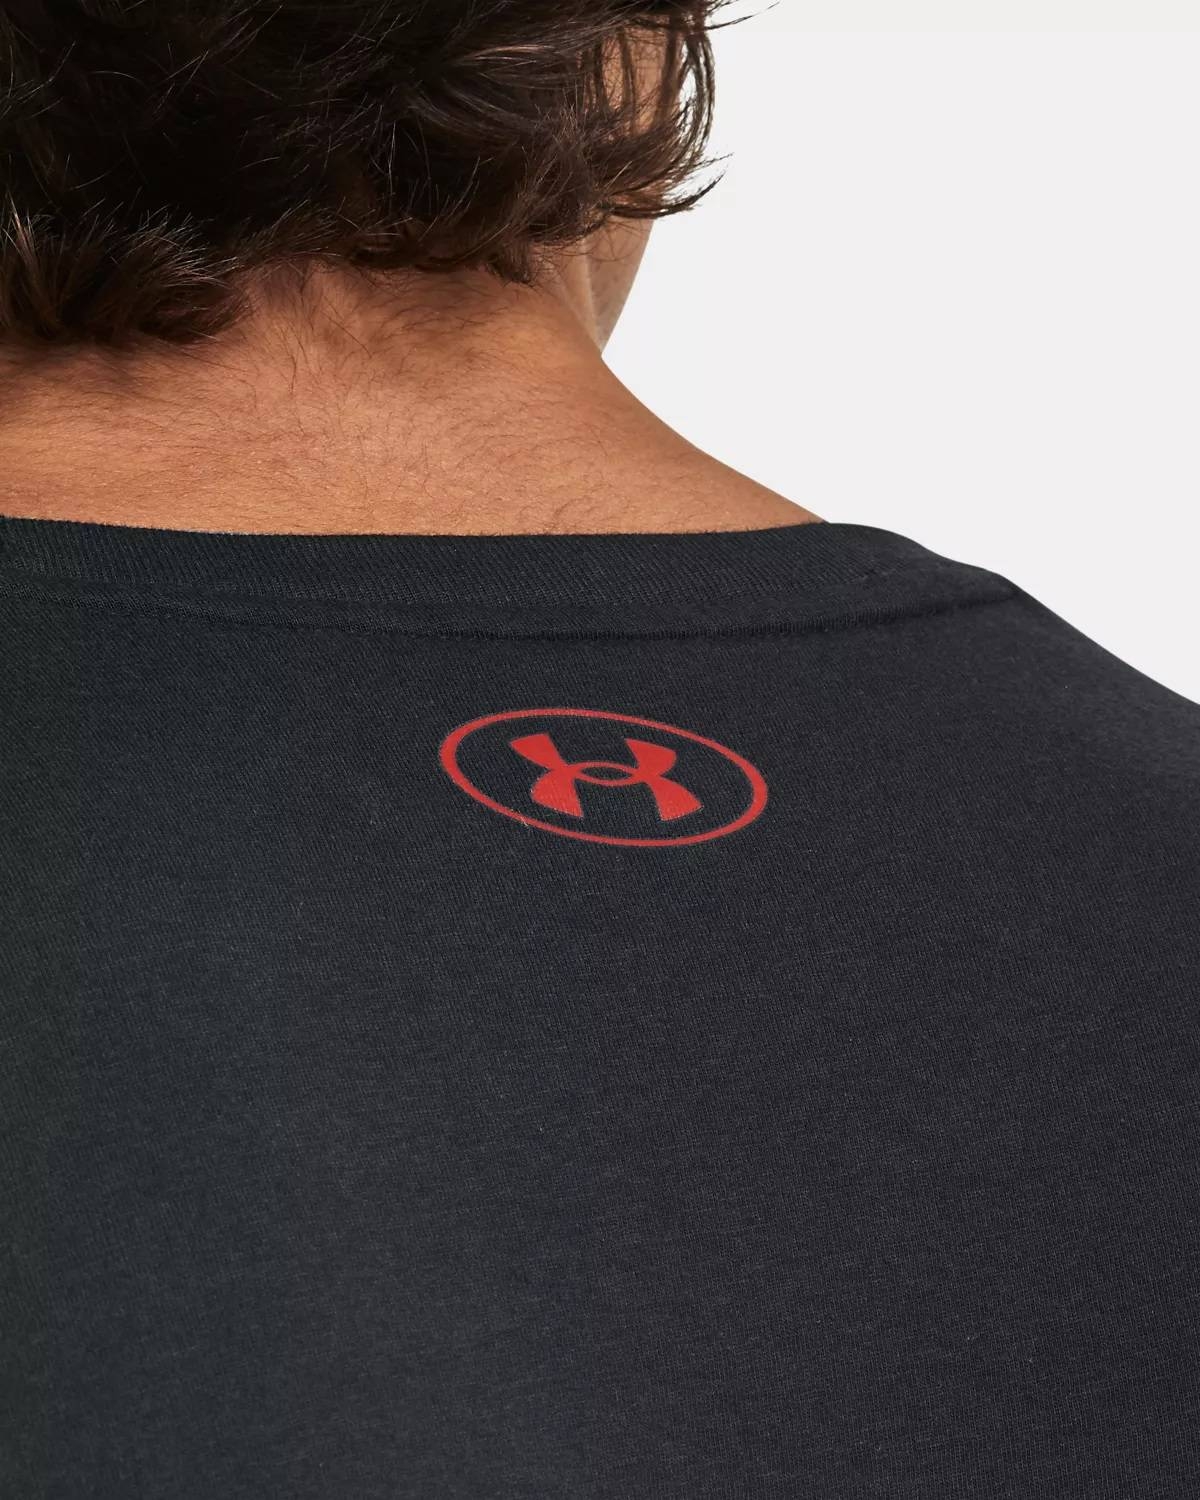 UNDER ARMOUR PROJECT ROCK PARADISE TEE